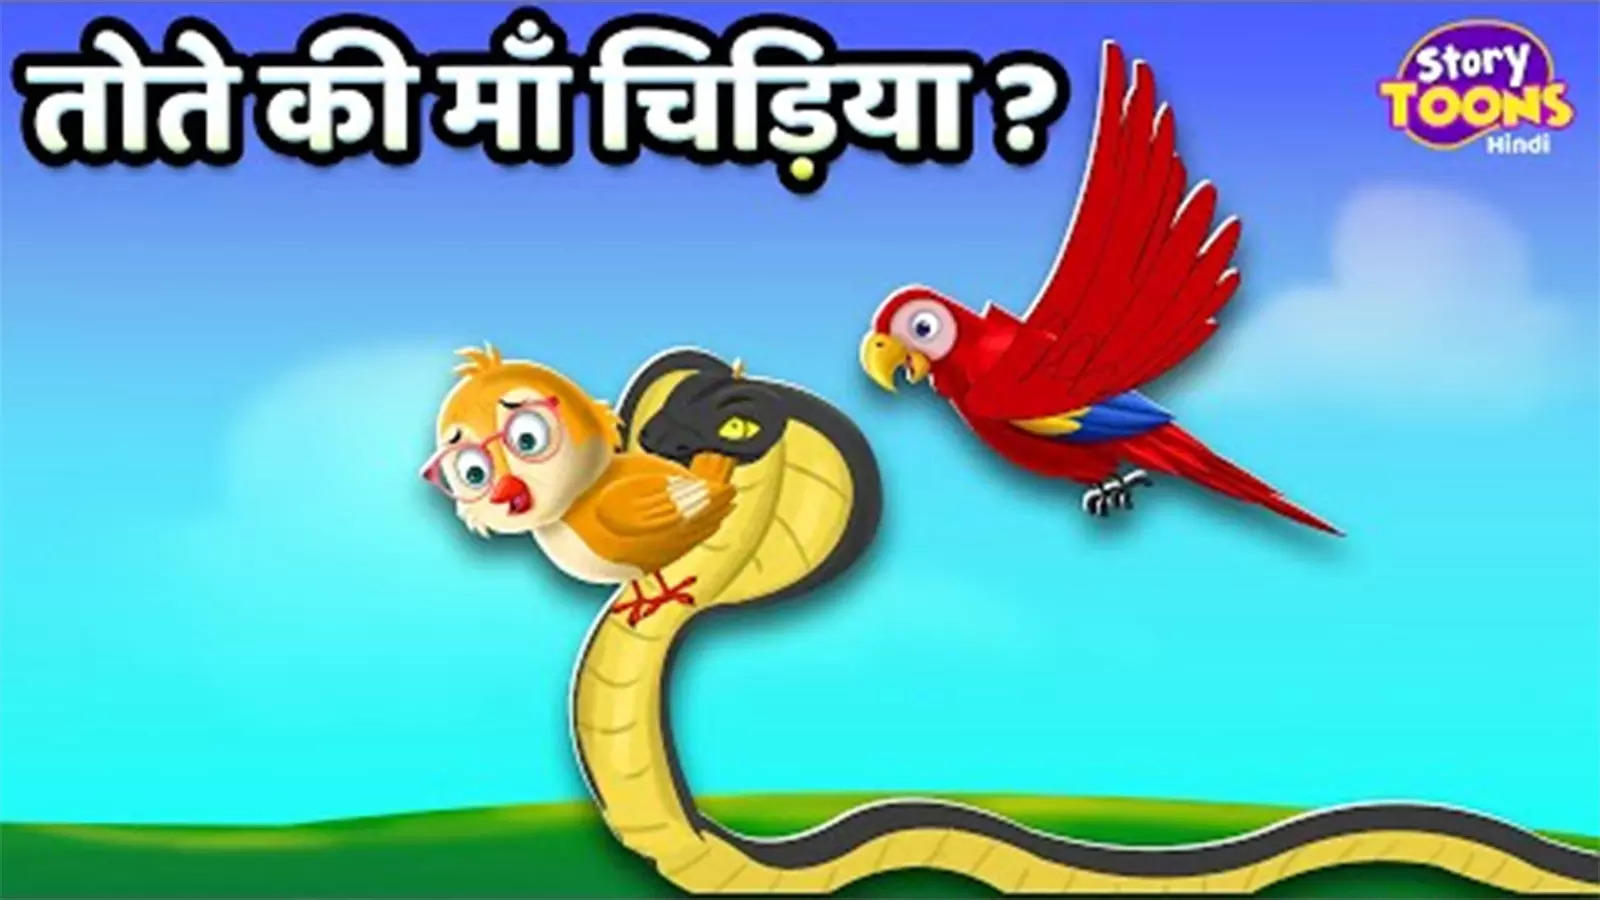 Popular Kids Hindi Story 'Tote Ki Maa Chidiya' For Kids - Check Out  Children's Nursery Rhymes, Baby Songs, Fairy Tales And Many More In Hindi |  Entertainment - Times of India Videos